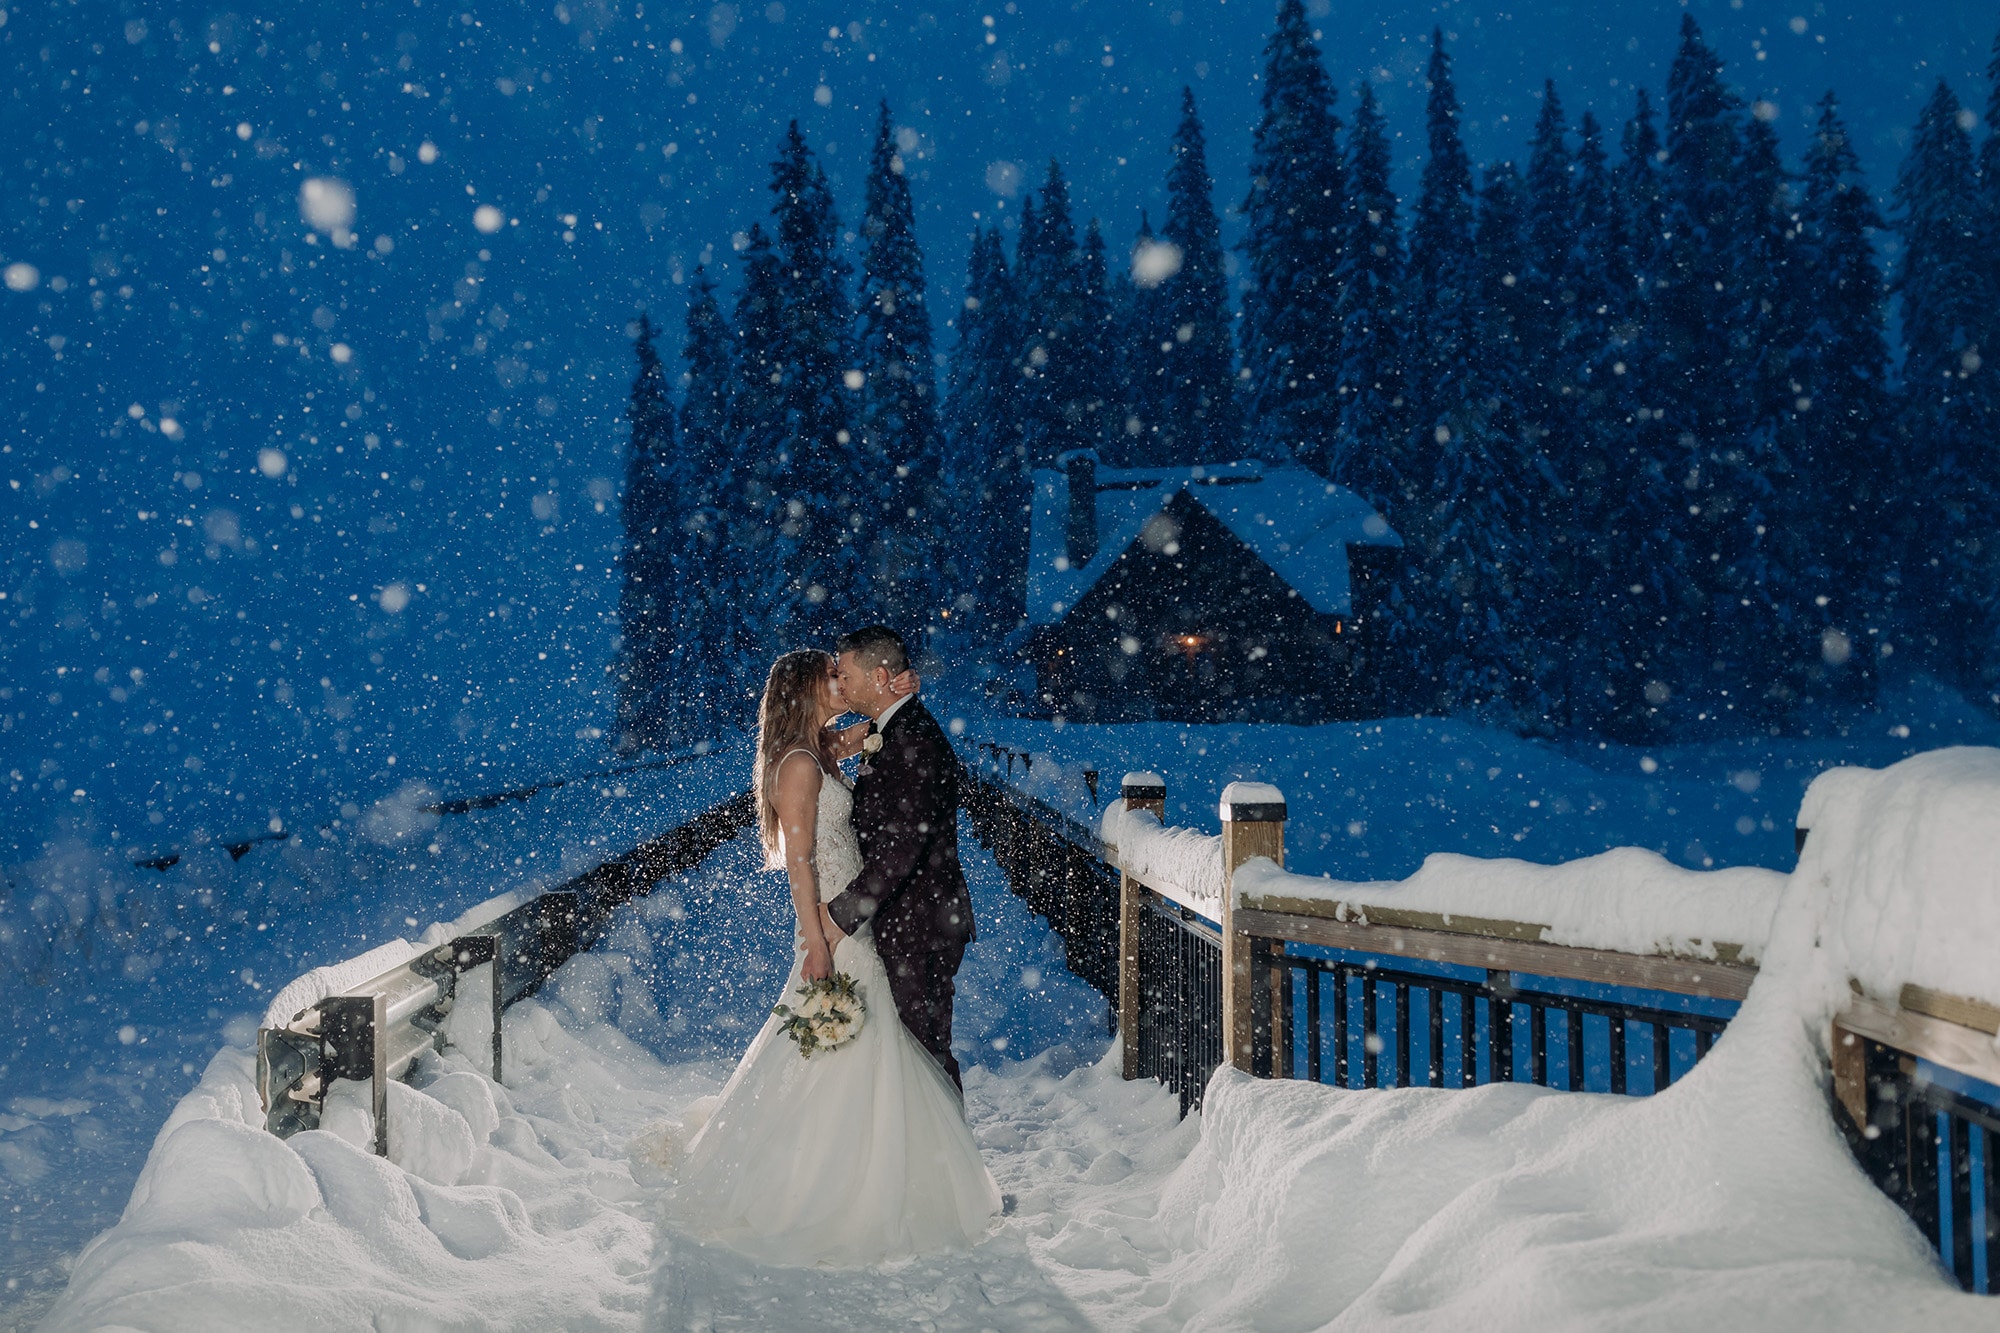 5 Tips for Planning your Dream Mountain Elopement magical winter wonderland wedding portraits night emerald lake lodge twilight snow